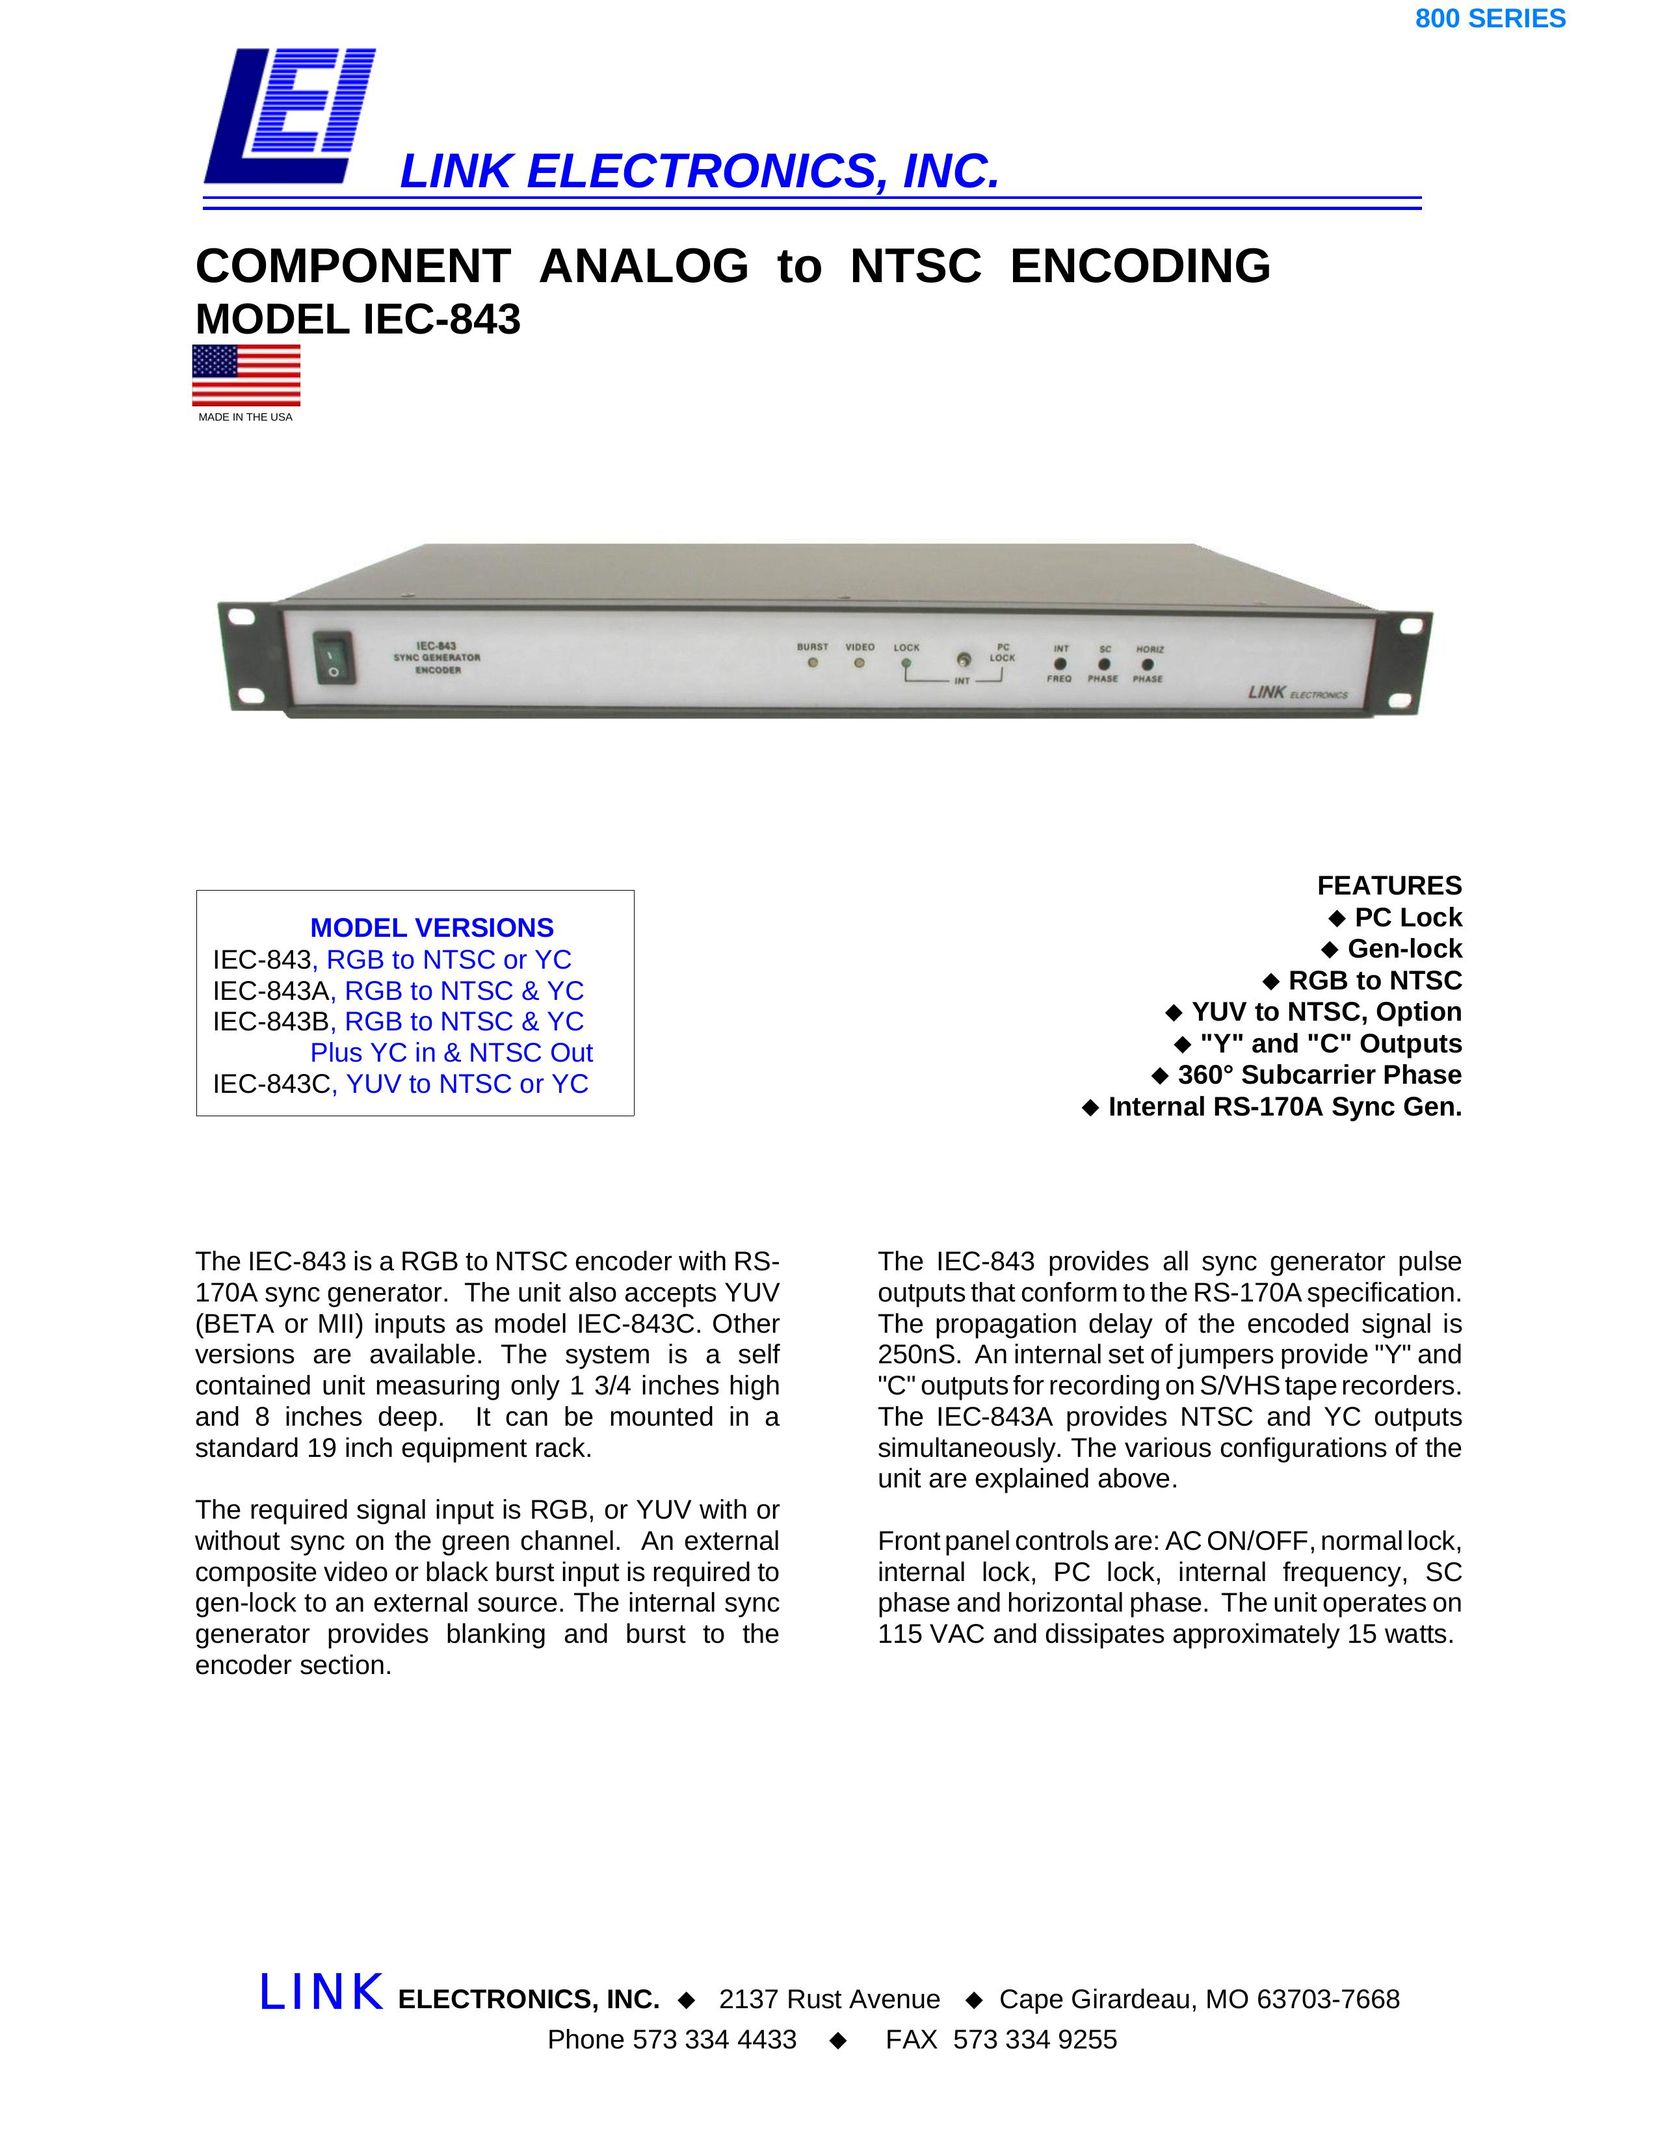 Link electronic IEC-843 Network Router User Manual